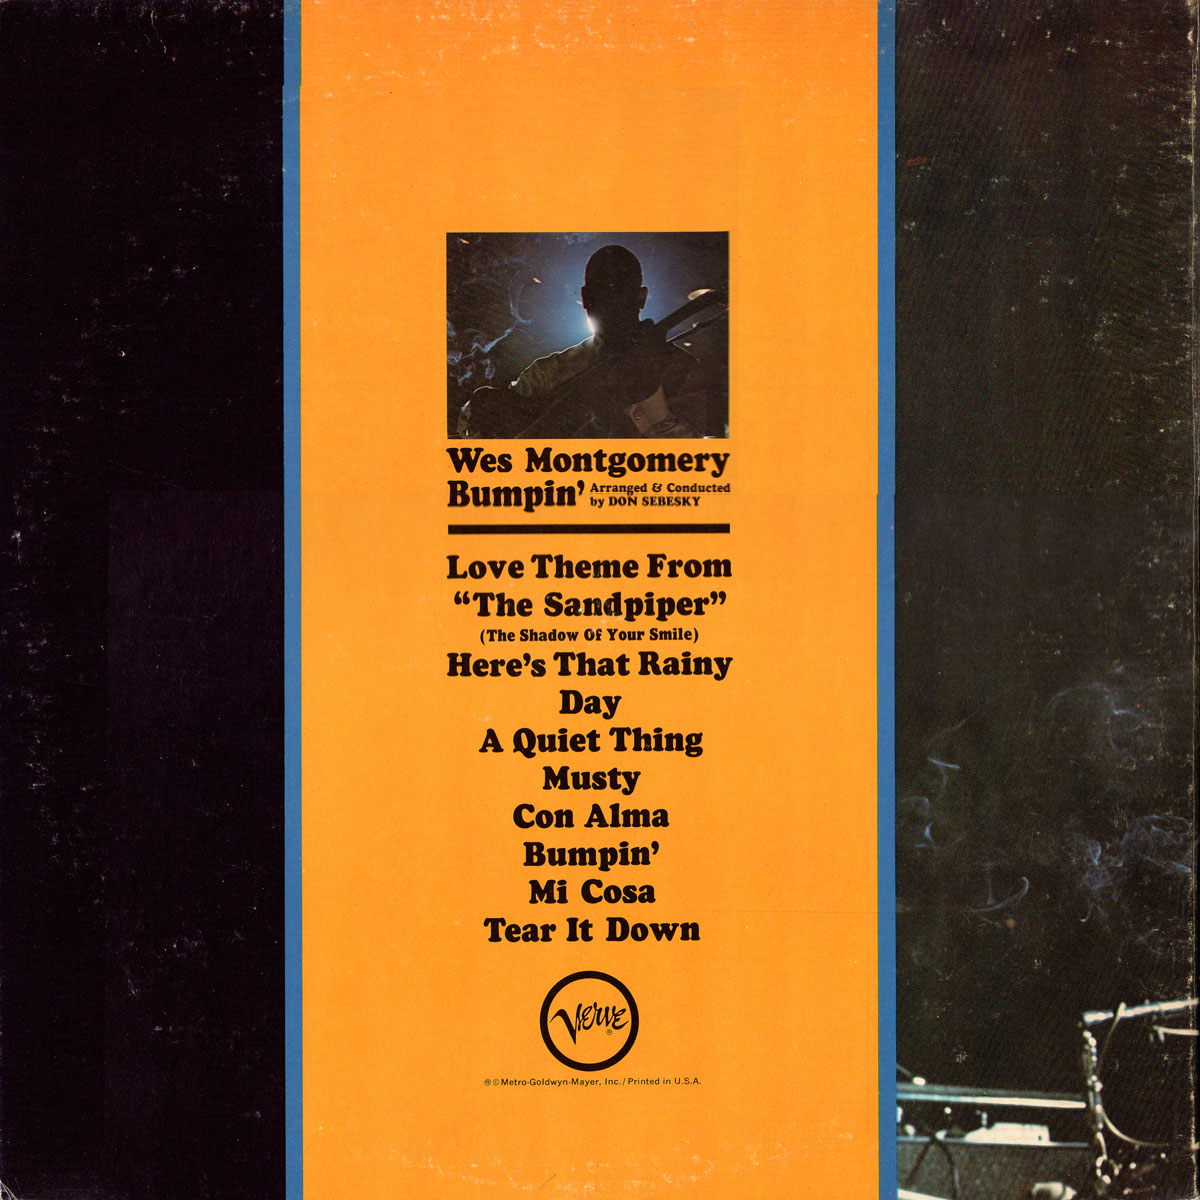 Wes Montgomery - Bumpin' - Back cover